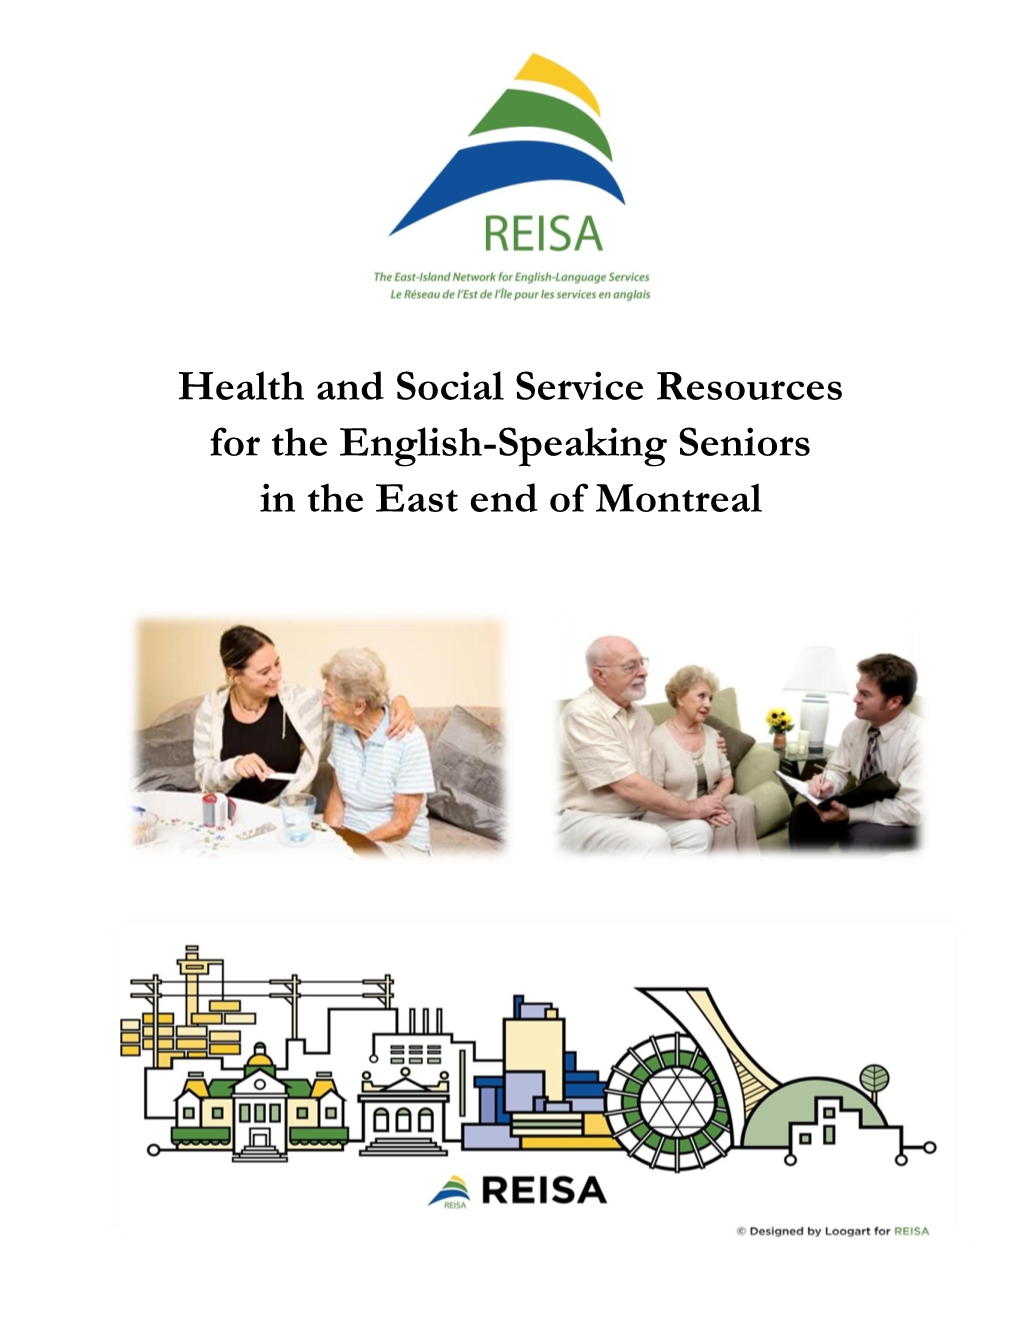 Health and Social Service Resources for the English-Speaking Seniors in the East End of Montreal